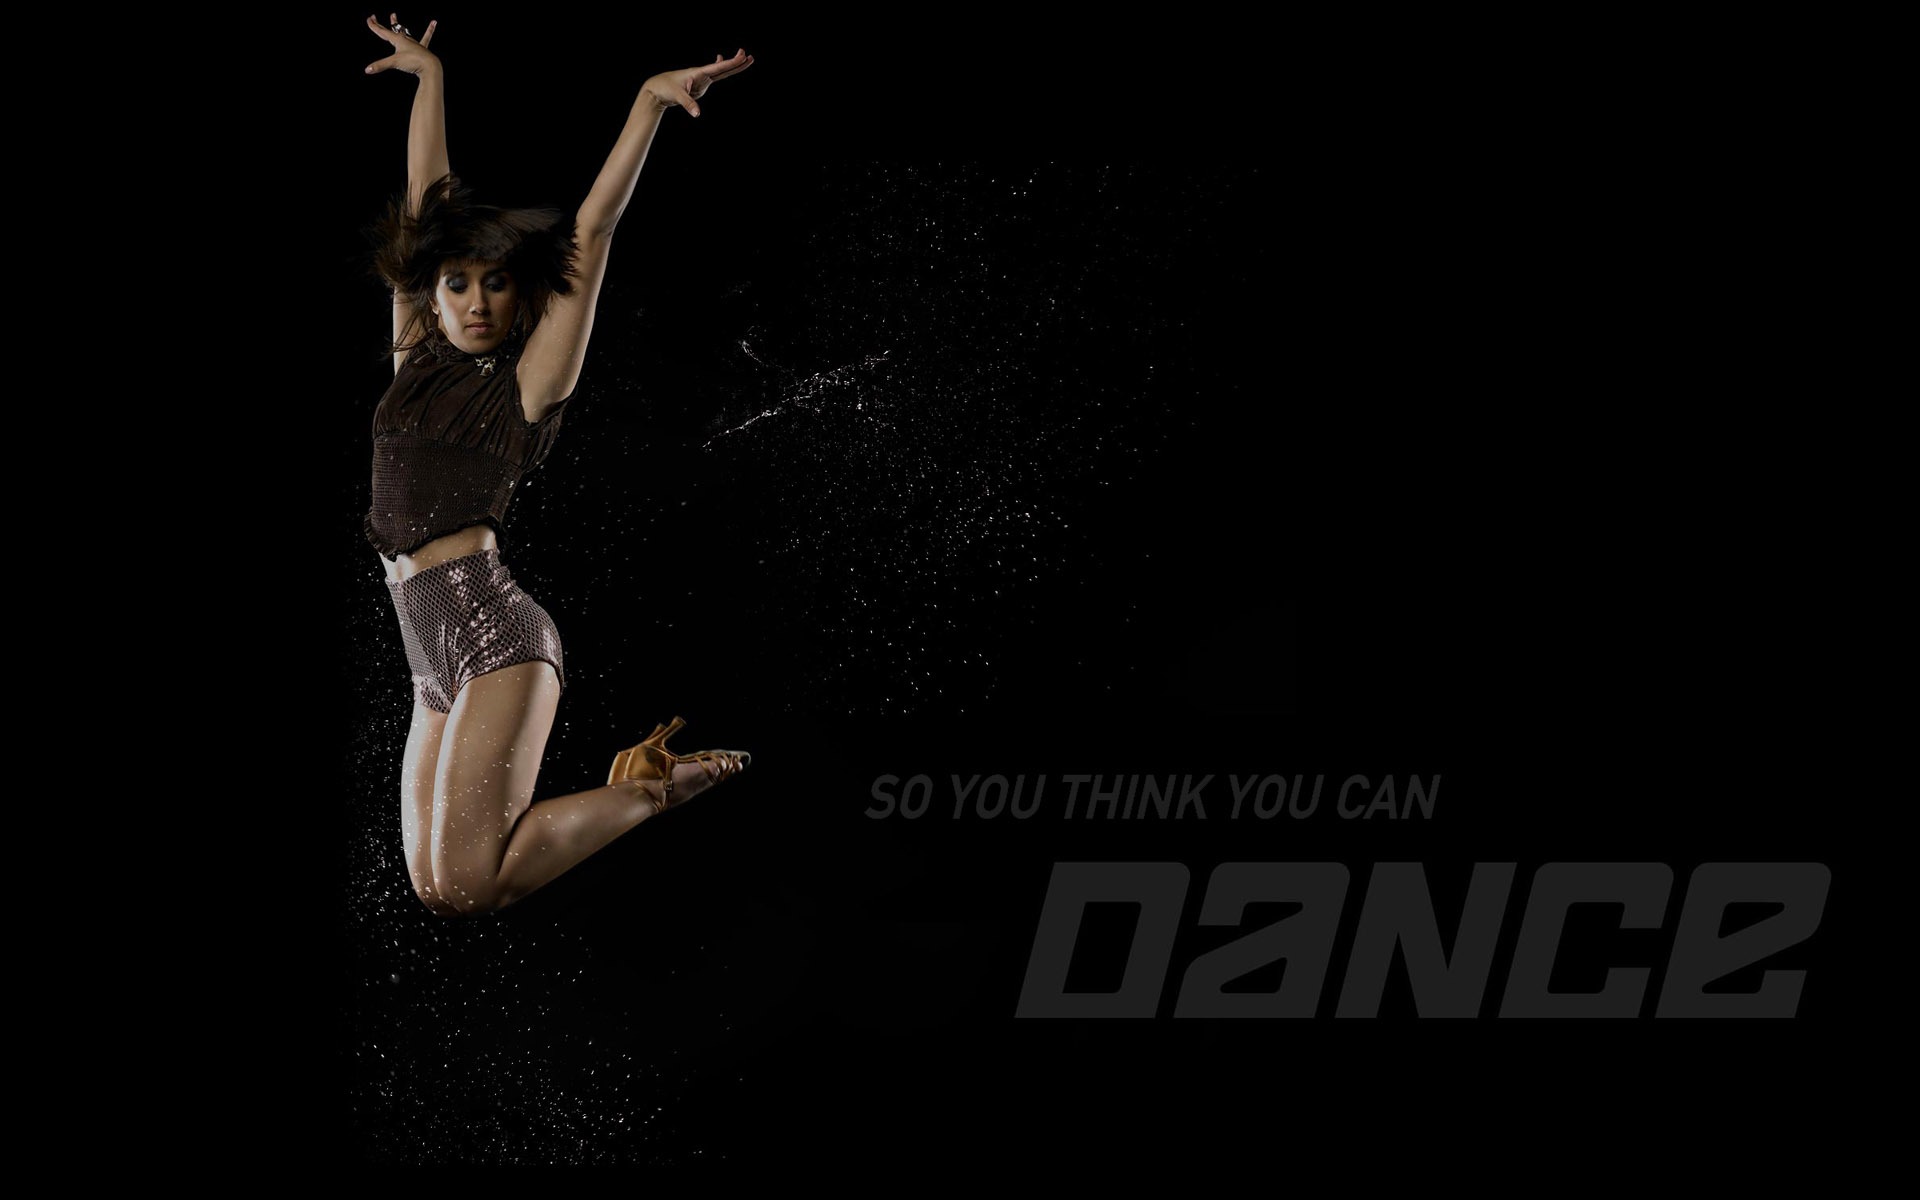 So You Think You Can Dance wallpaper (1) #11 - 1920x1200